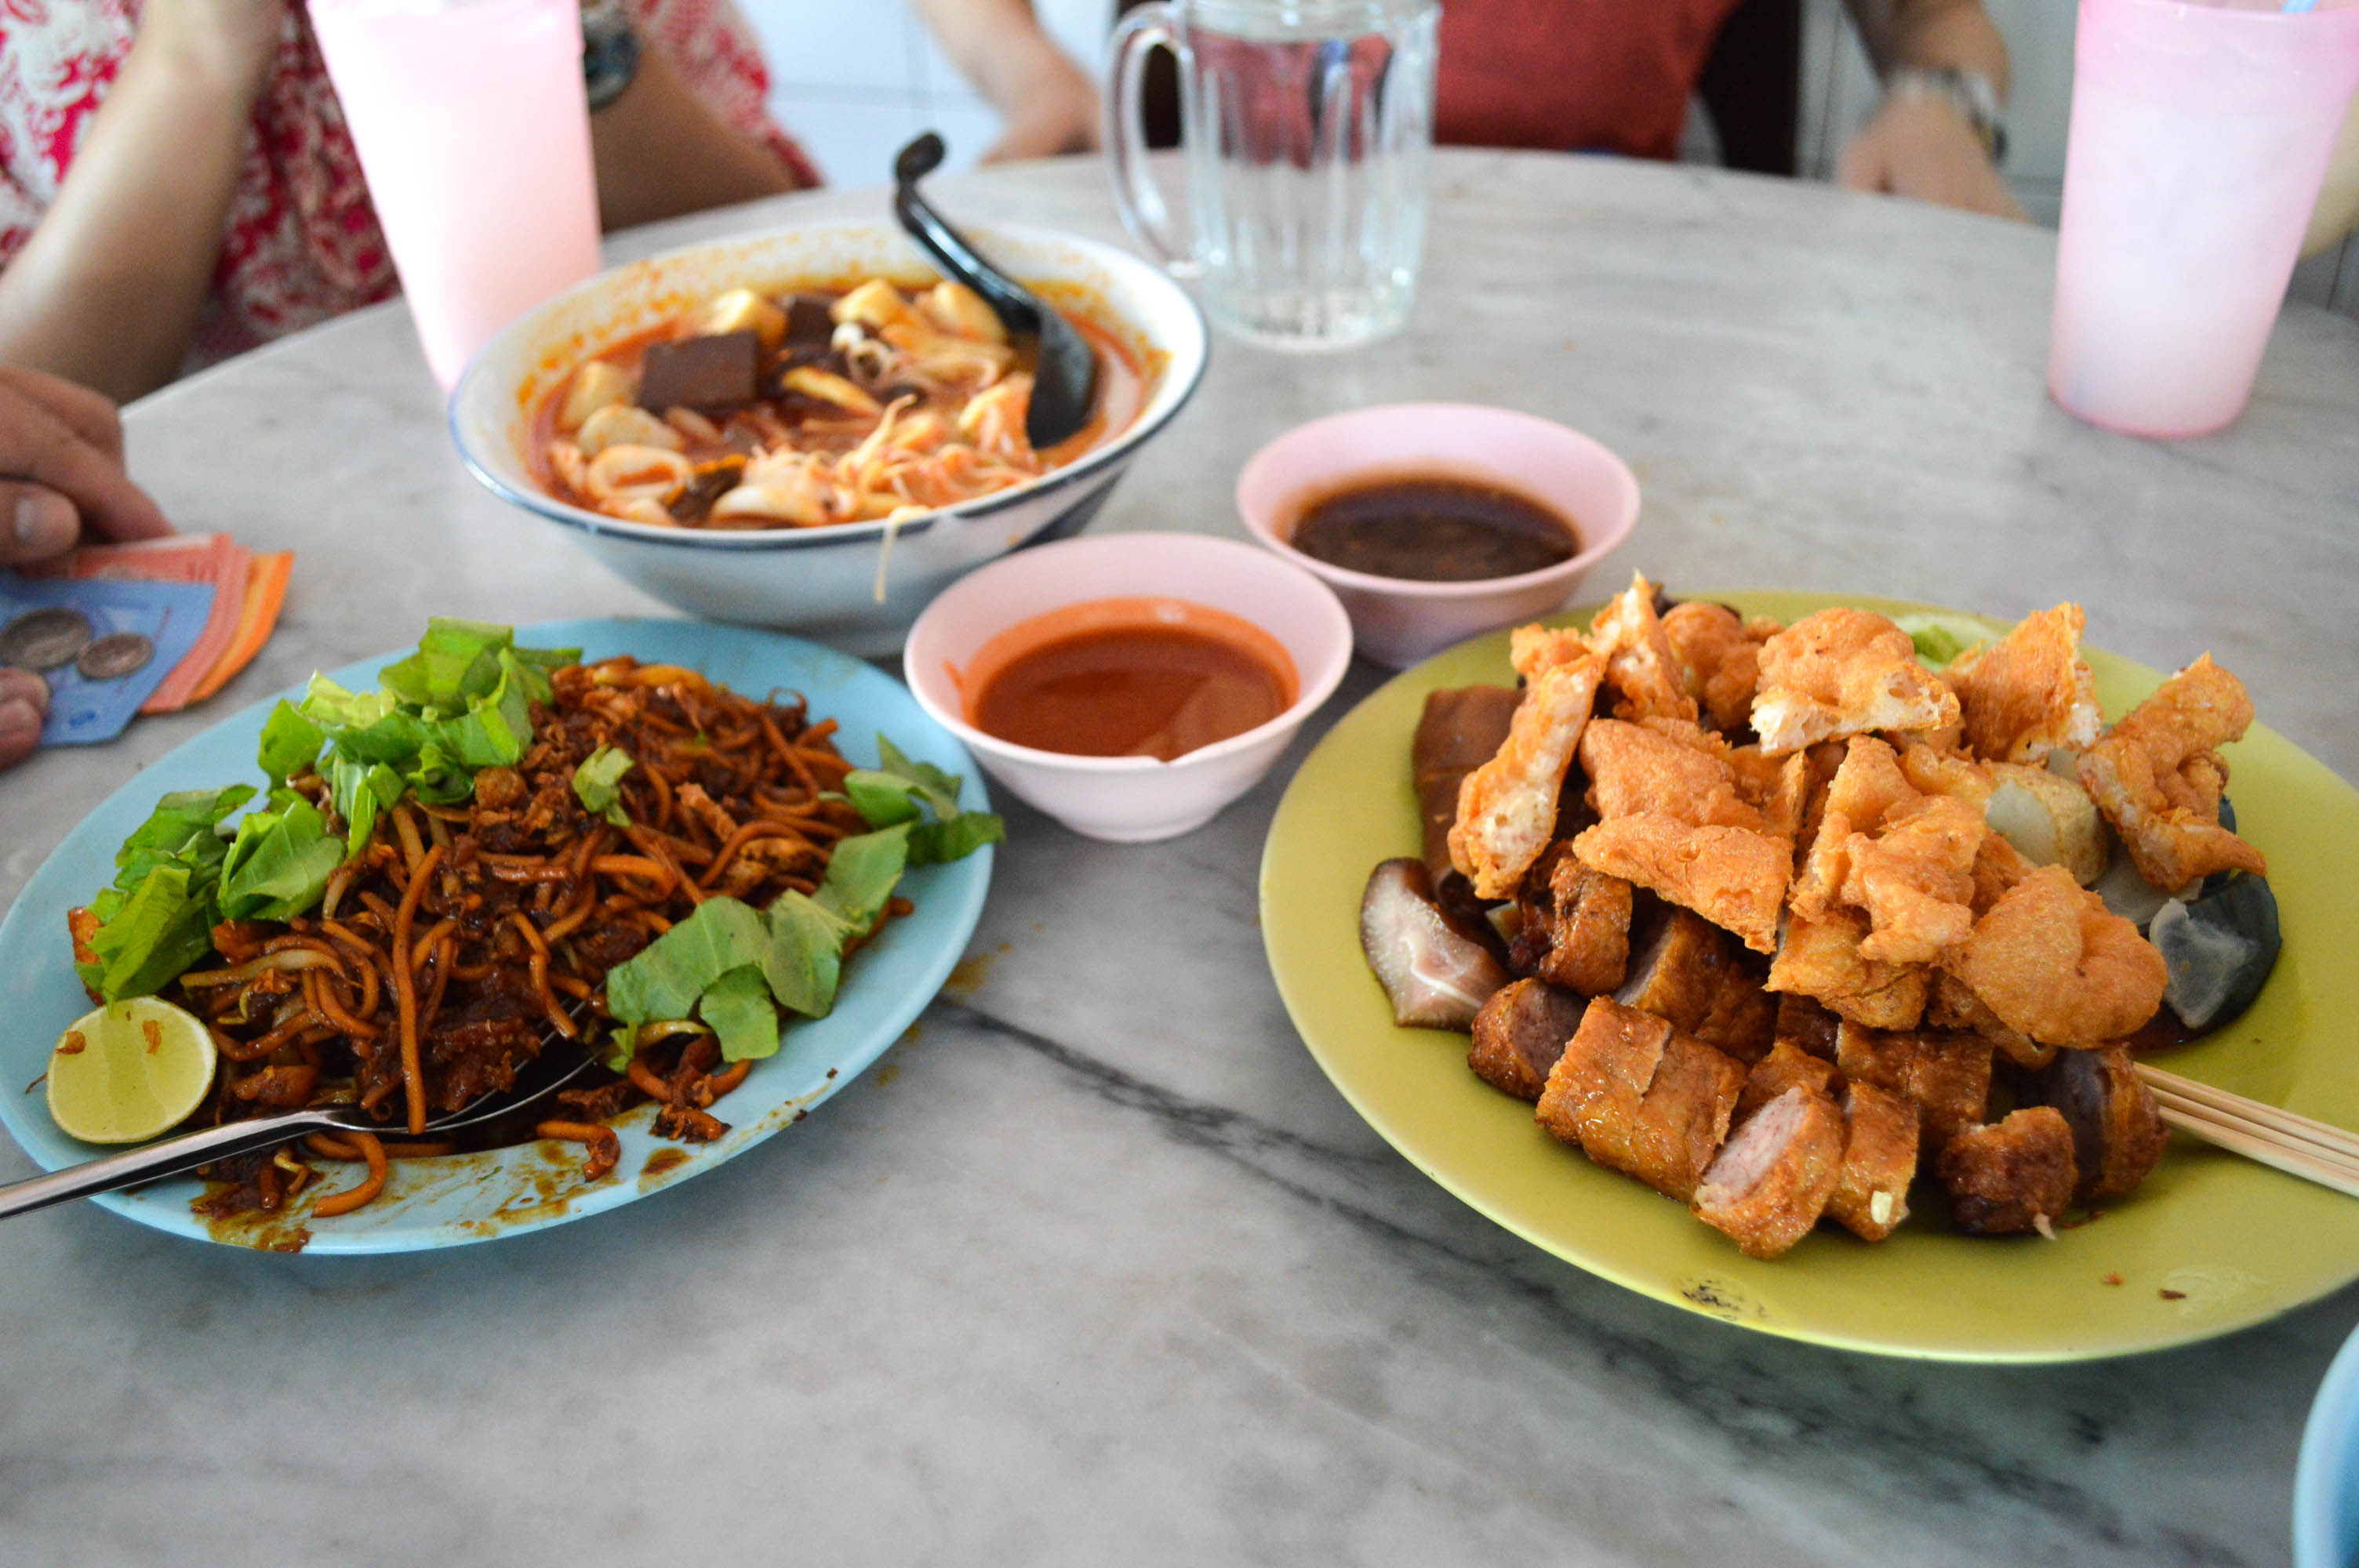 3rd Post : Penang Hawker food is here again! – Simple is everything.